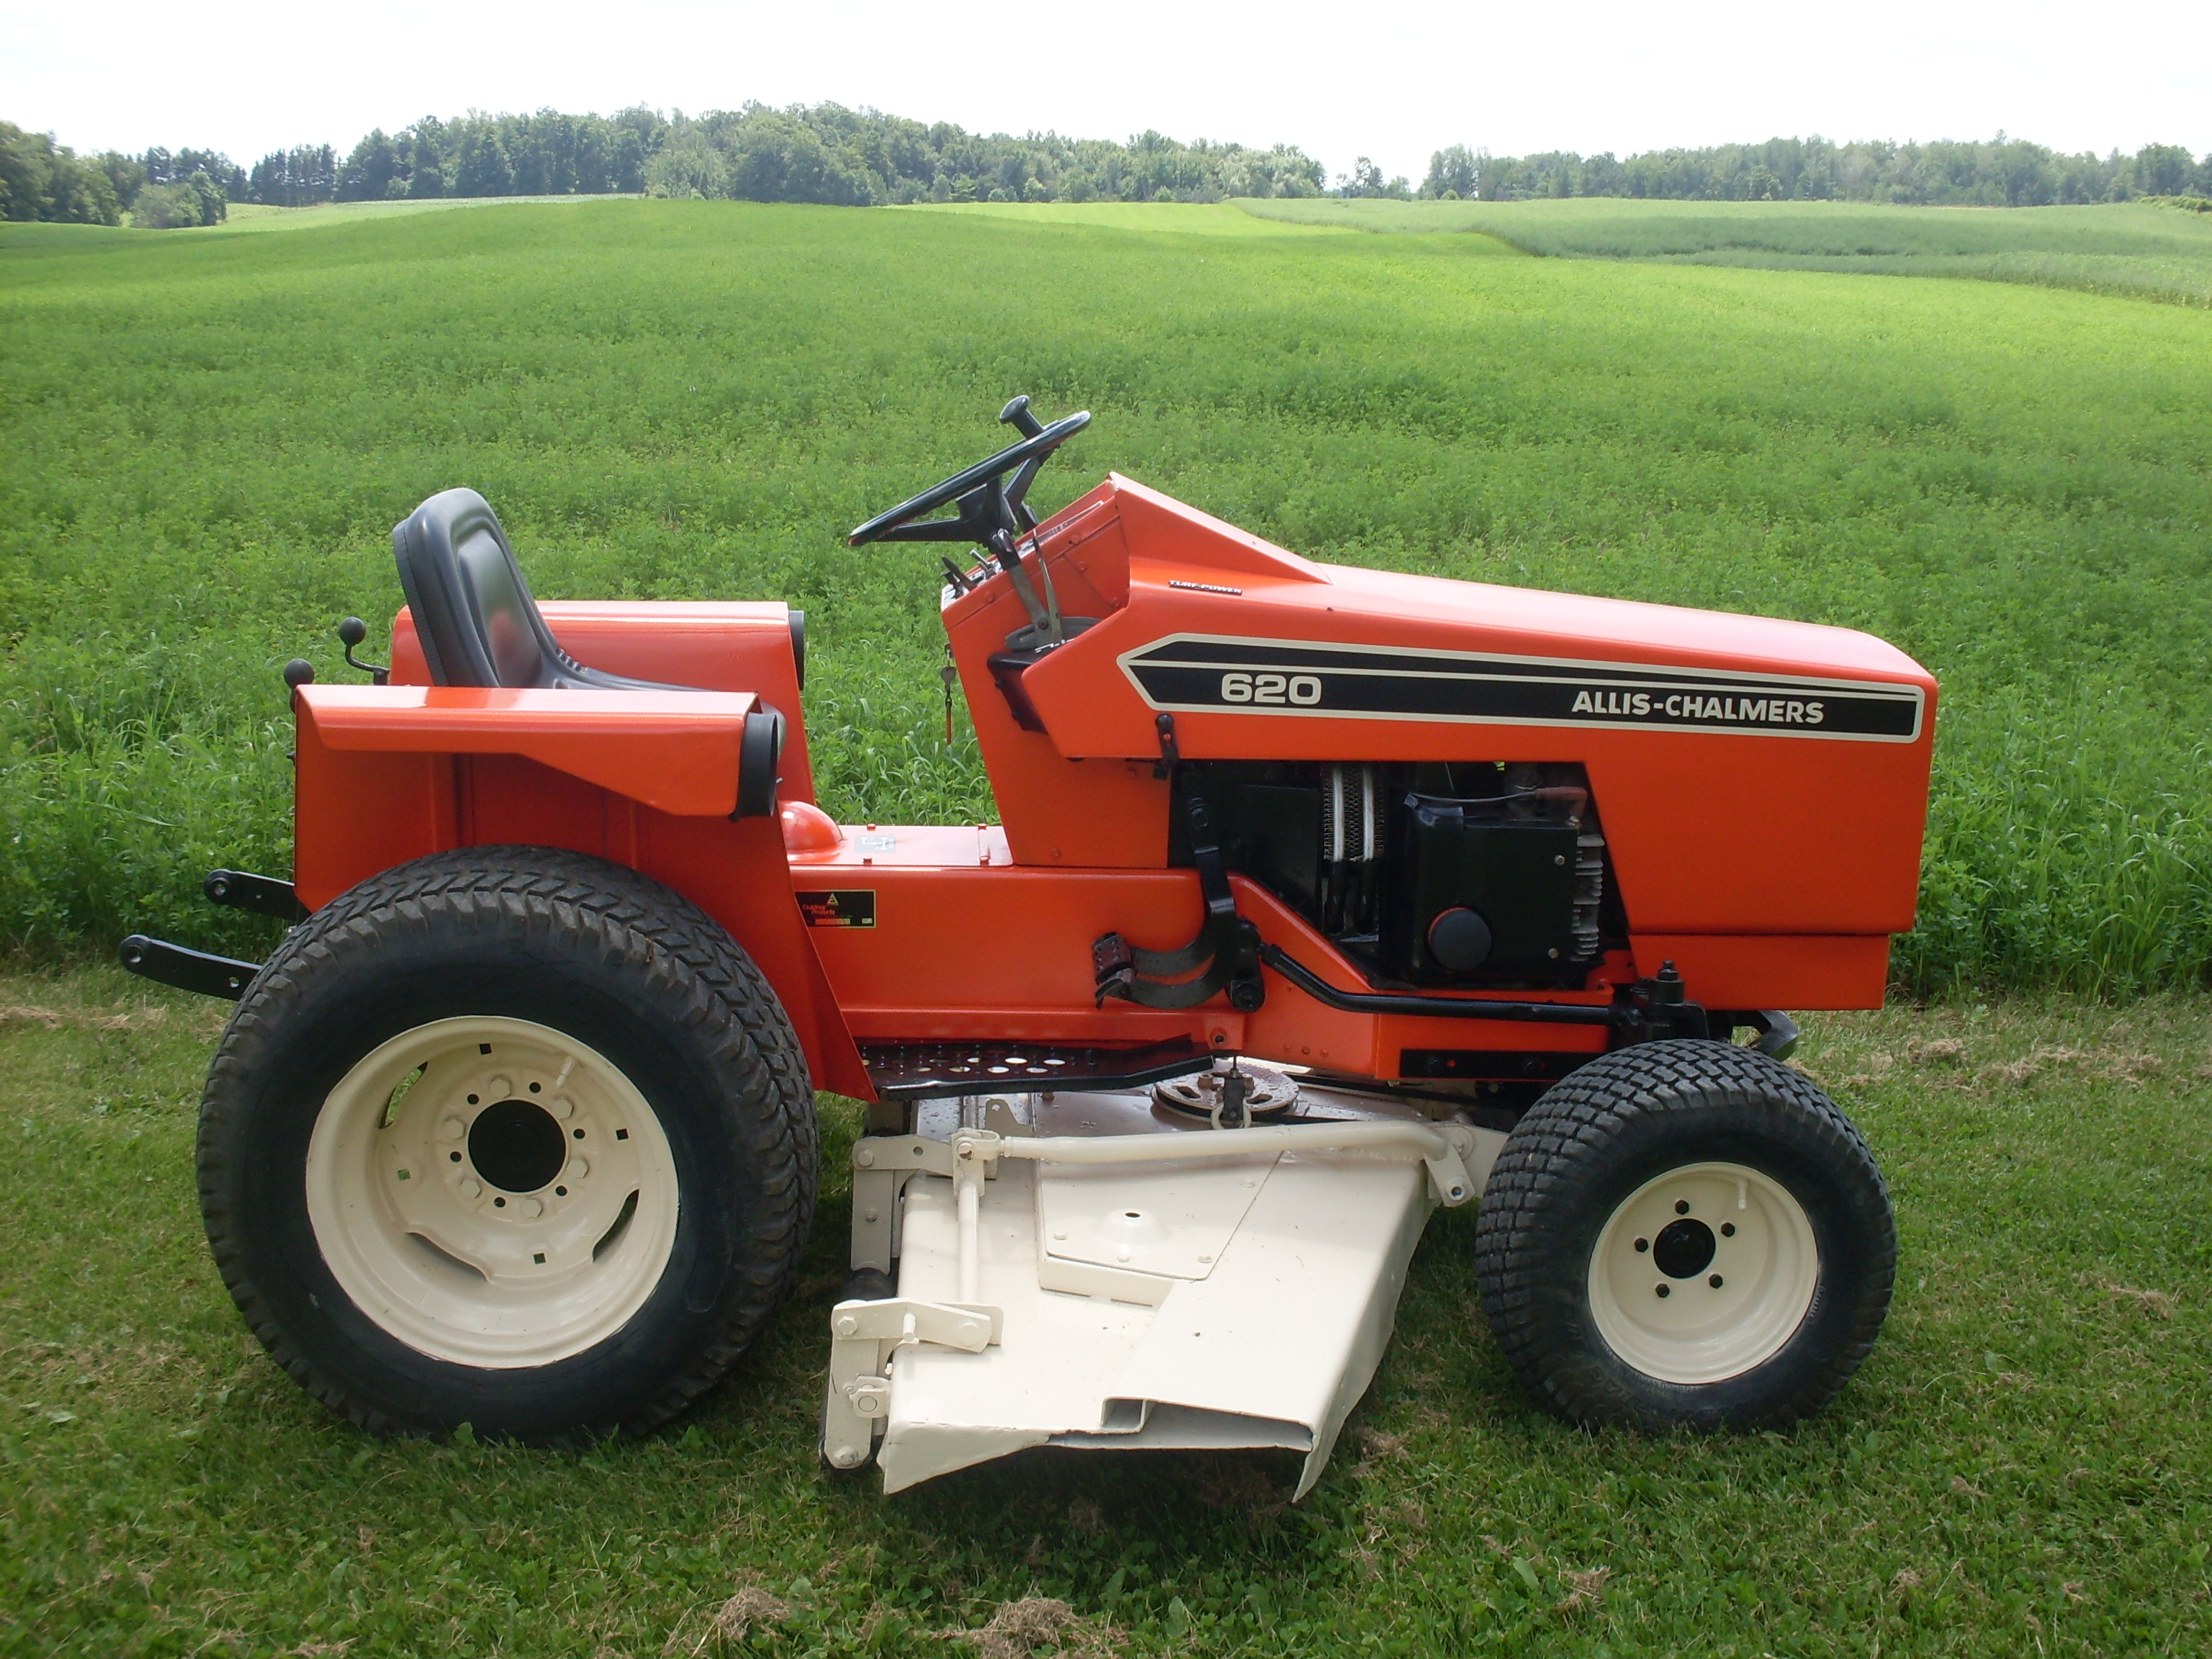 Allis Chalmers 620 allis chalmers 620 720 for sale - online and mail ...